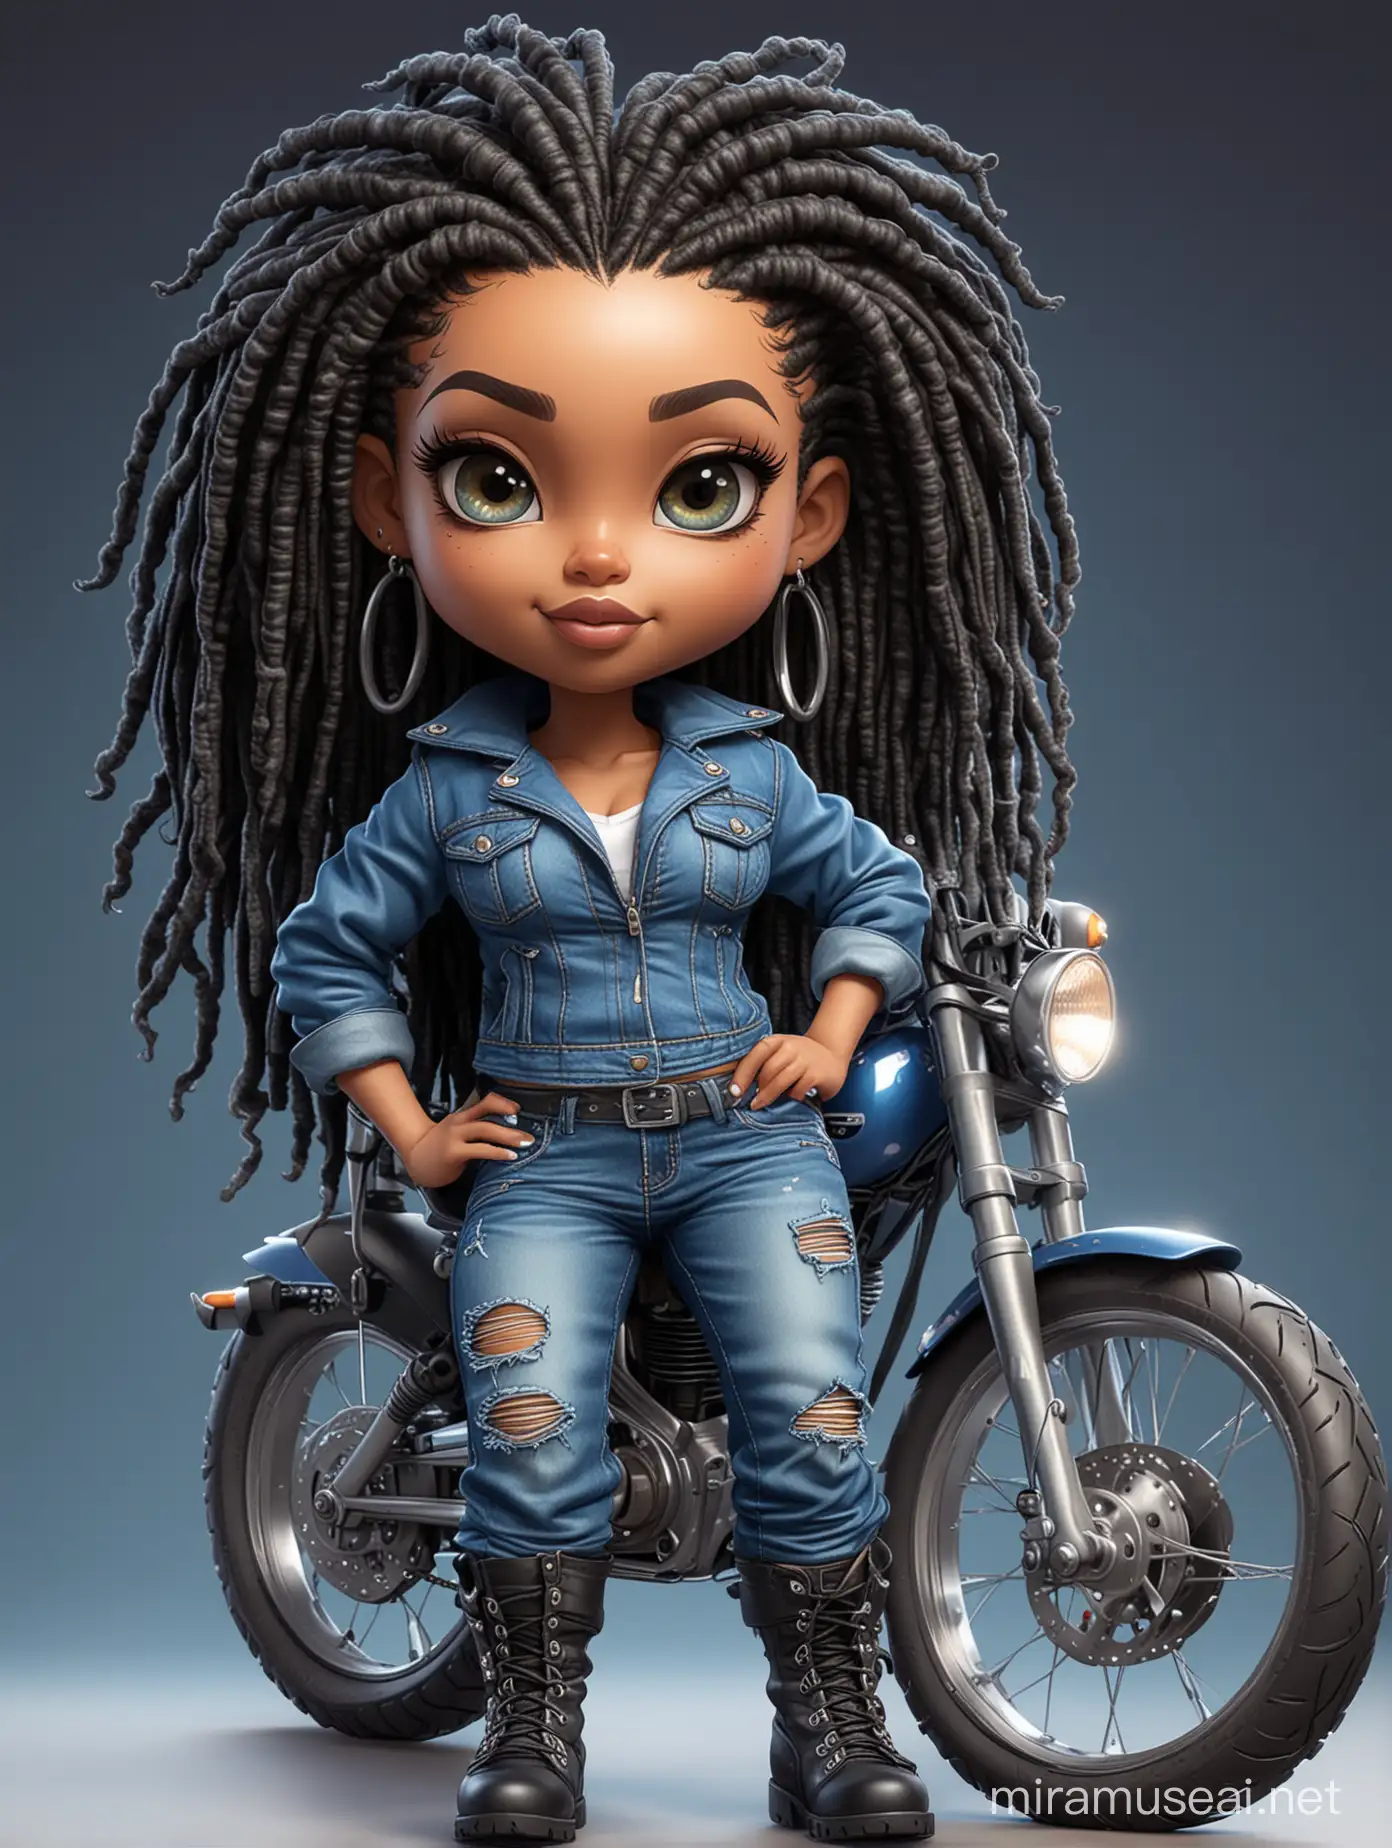 Chibi Cartoon Voluptuous Black Female in Blue Jean Outfit with Biker Boots at Bike Show